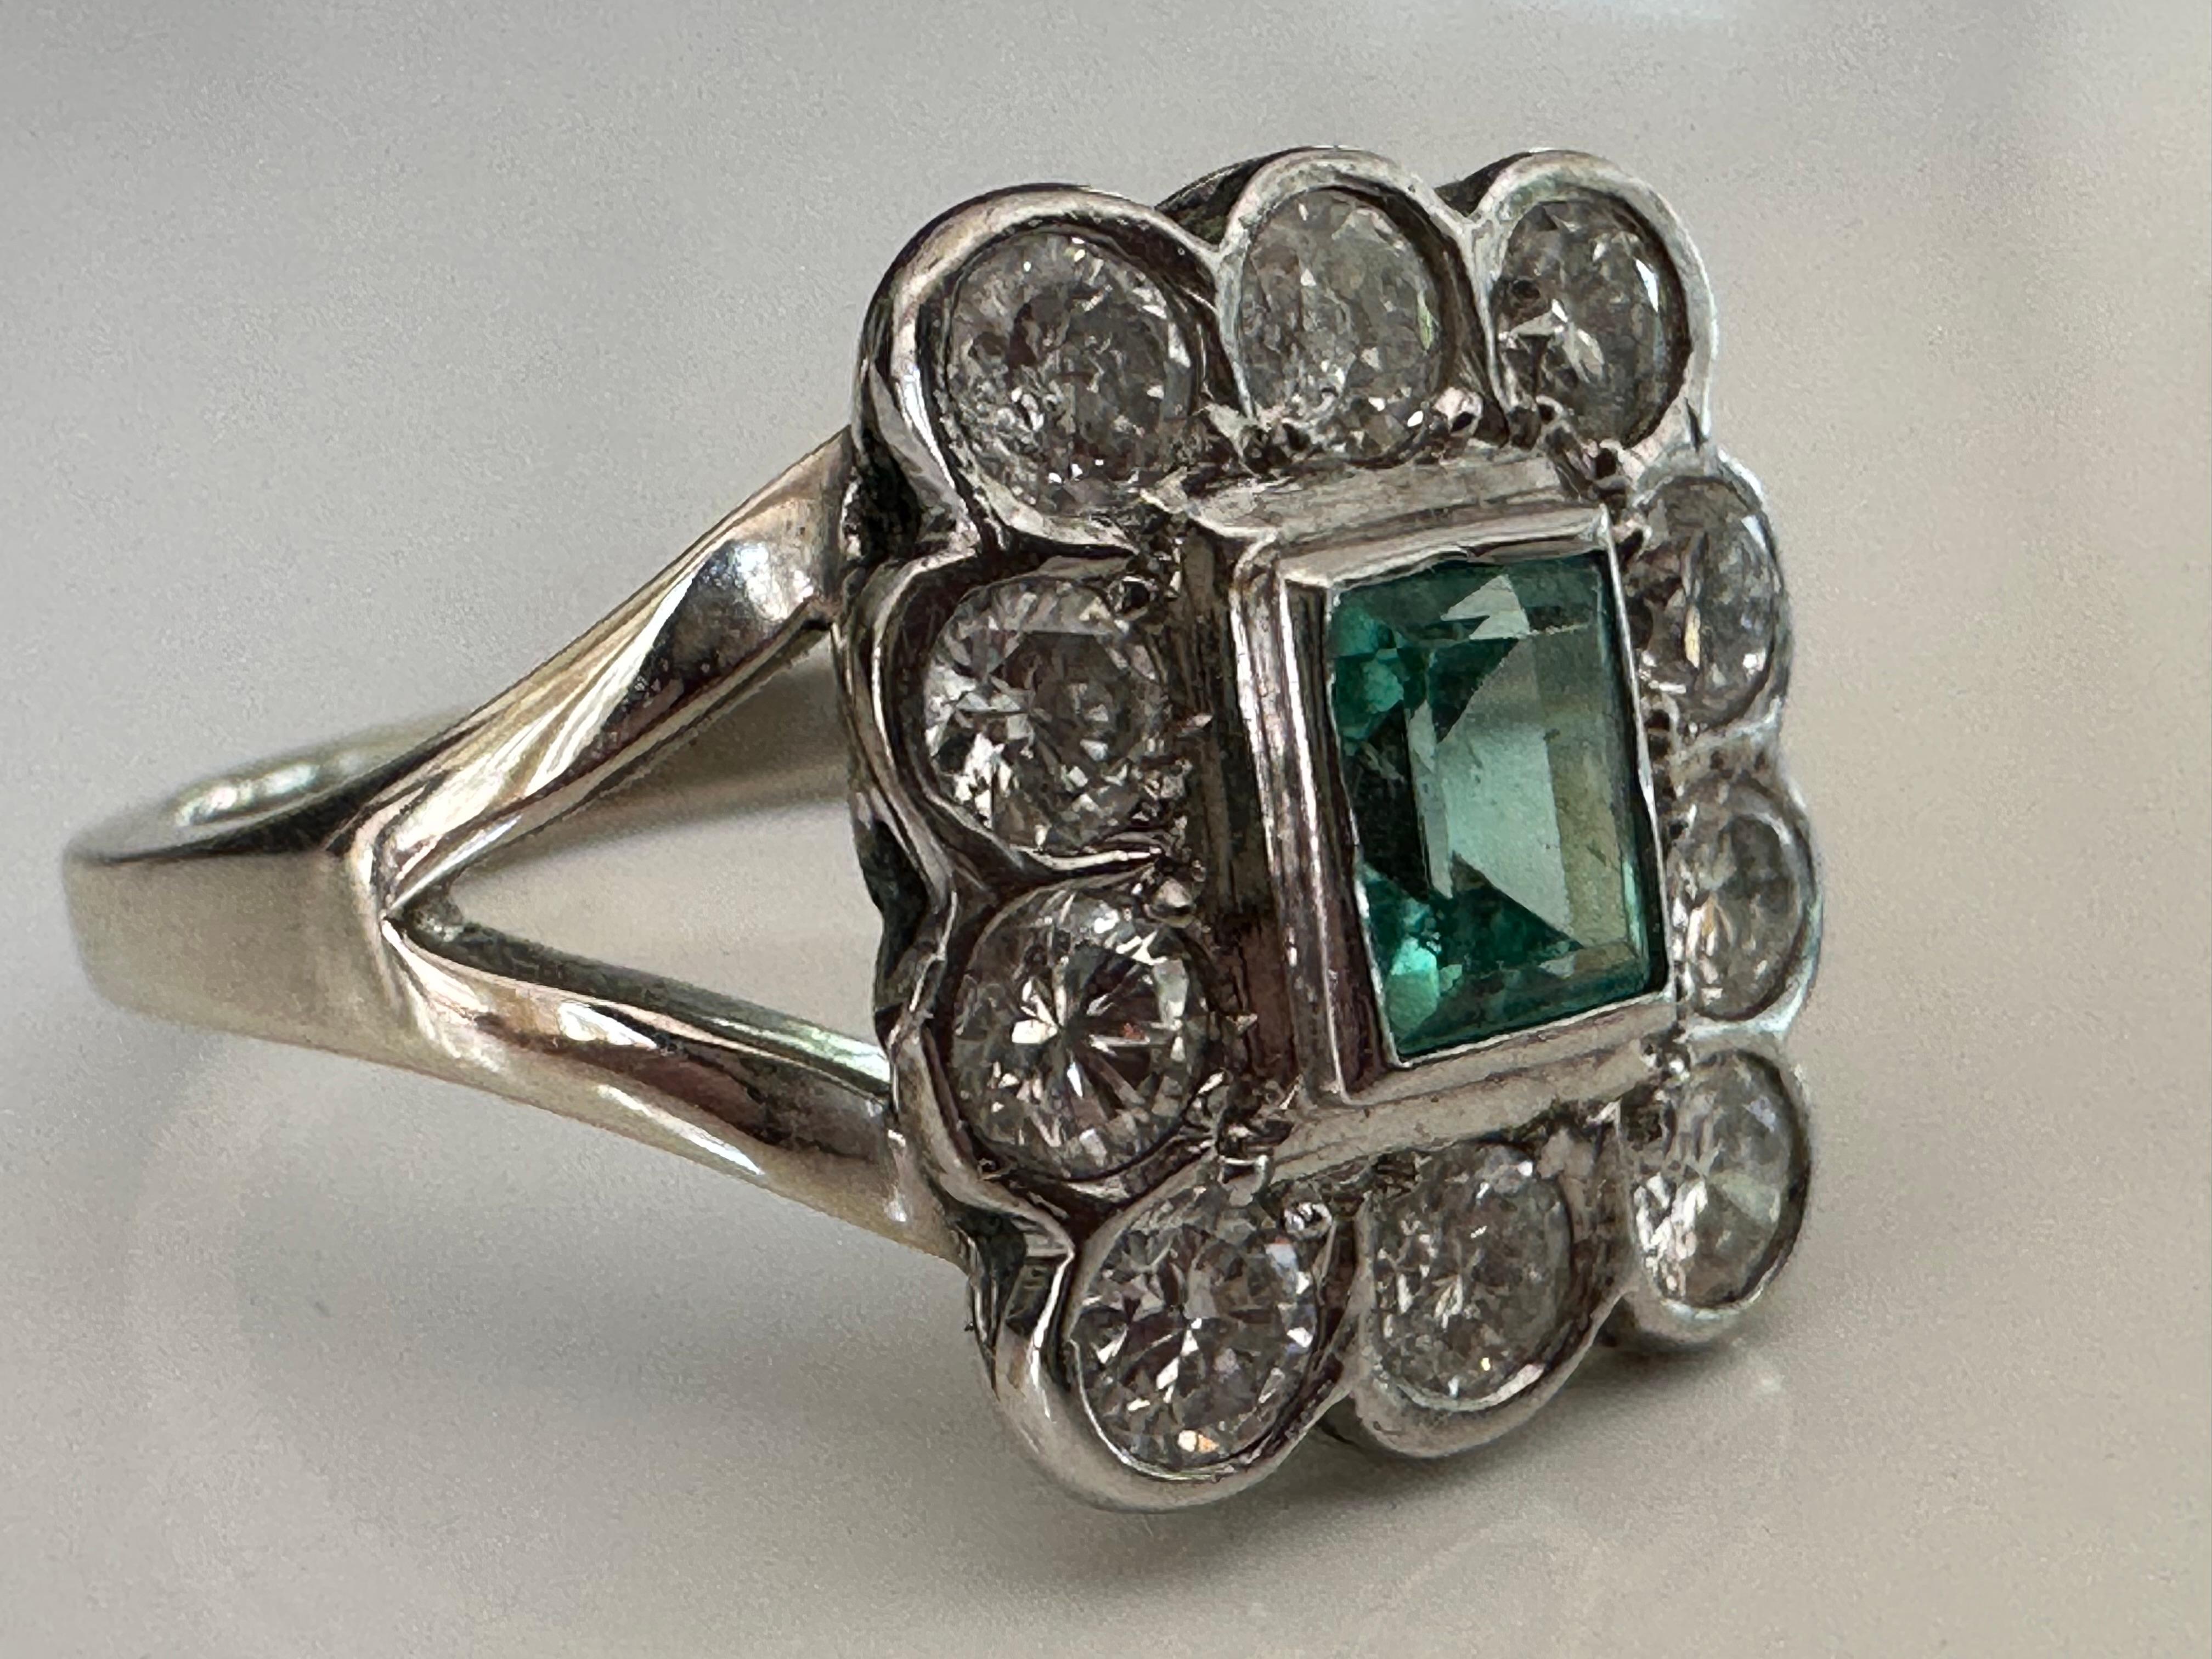 Crafted in the 1950s, this mid-century ring features a 0.70-carat Colombian emerald center stone framed by ten round brilliant-cut diamonds totaling 1.00 carat. Set in platinum with a split shank and band handcrafted in 14K white gold. 
